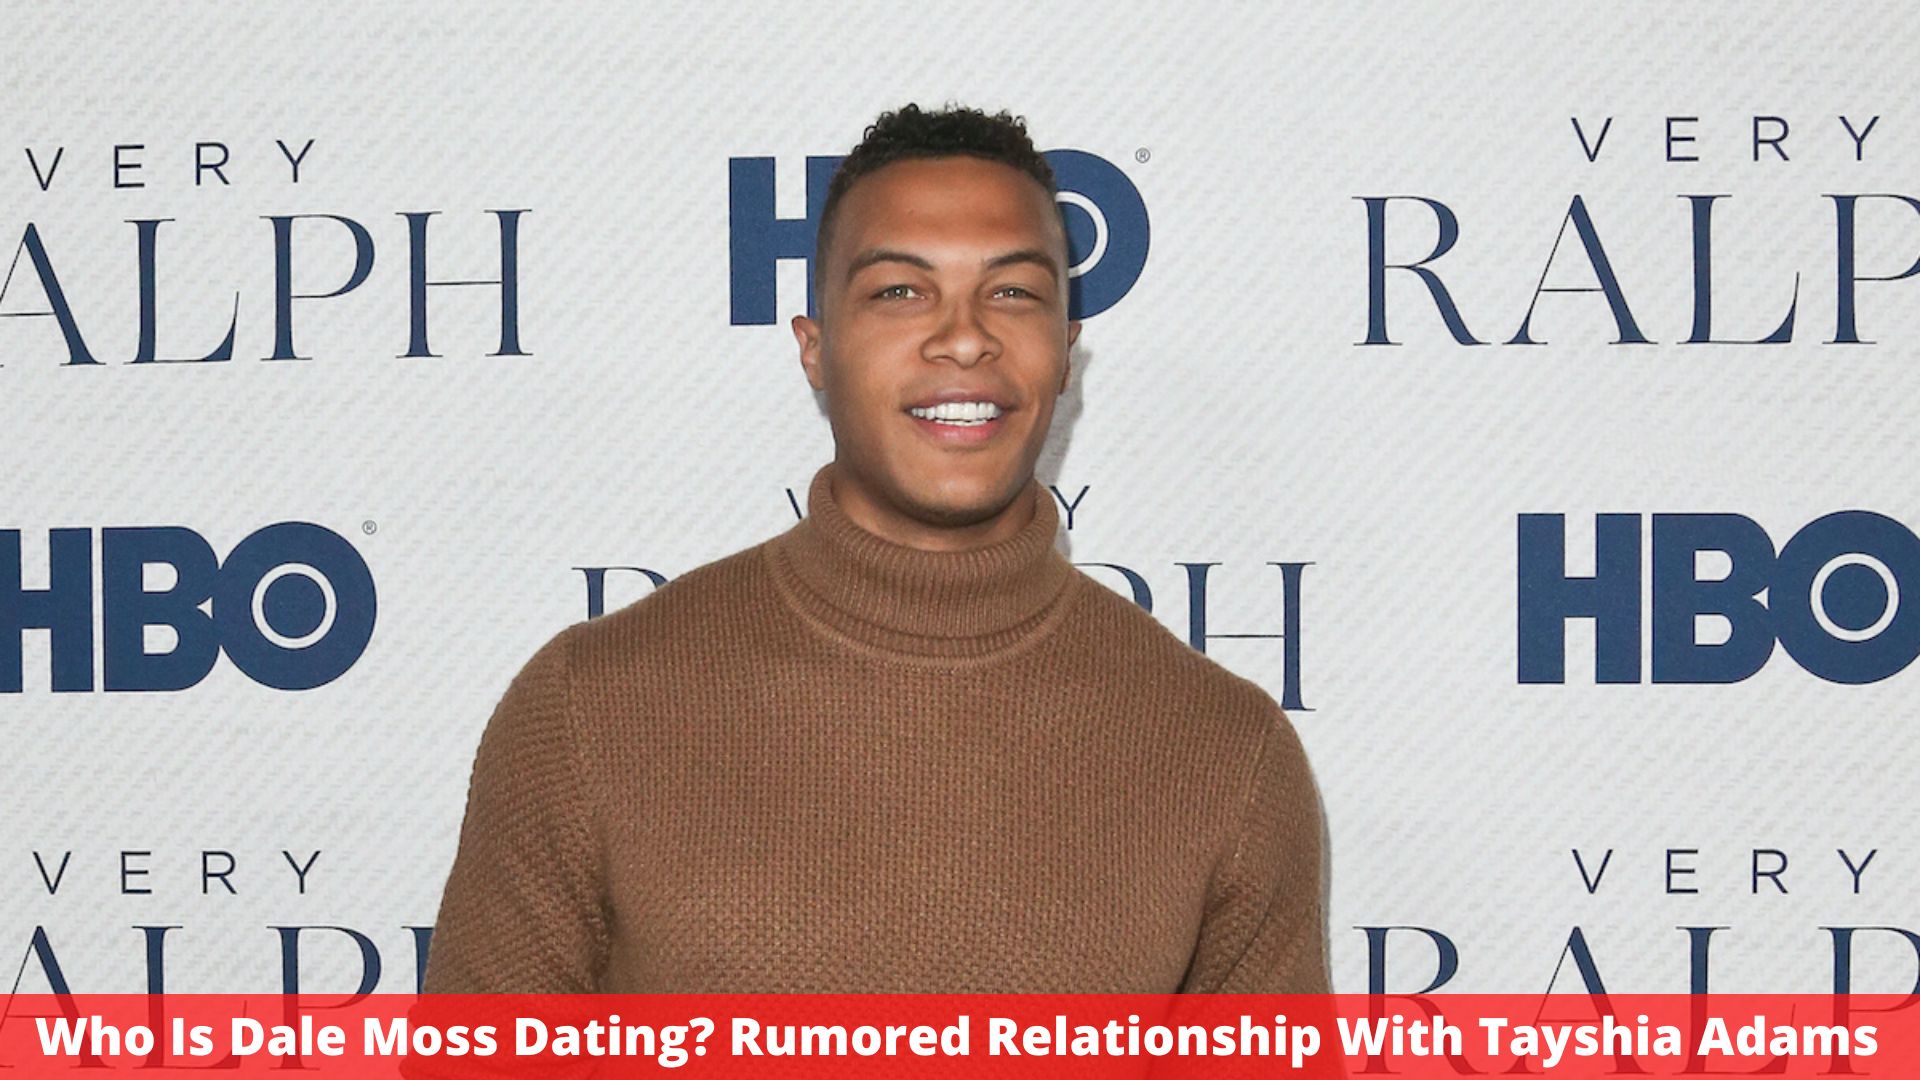 Who Is Dale Moss Dating? Rumored Relationship With Tayshia Adams